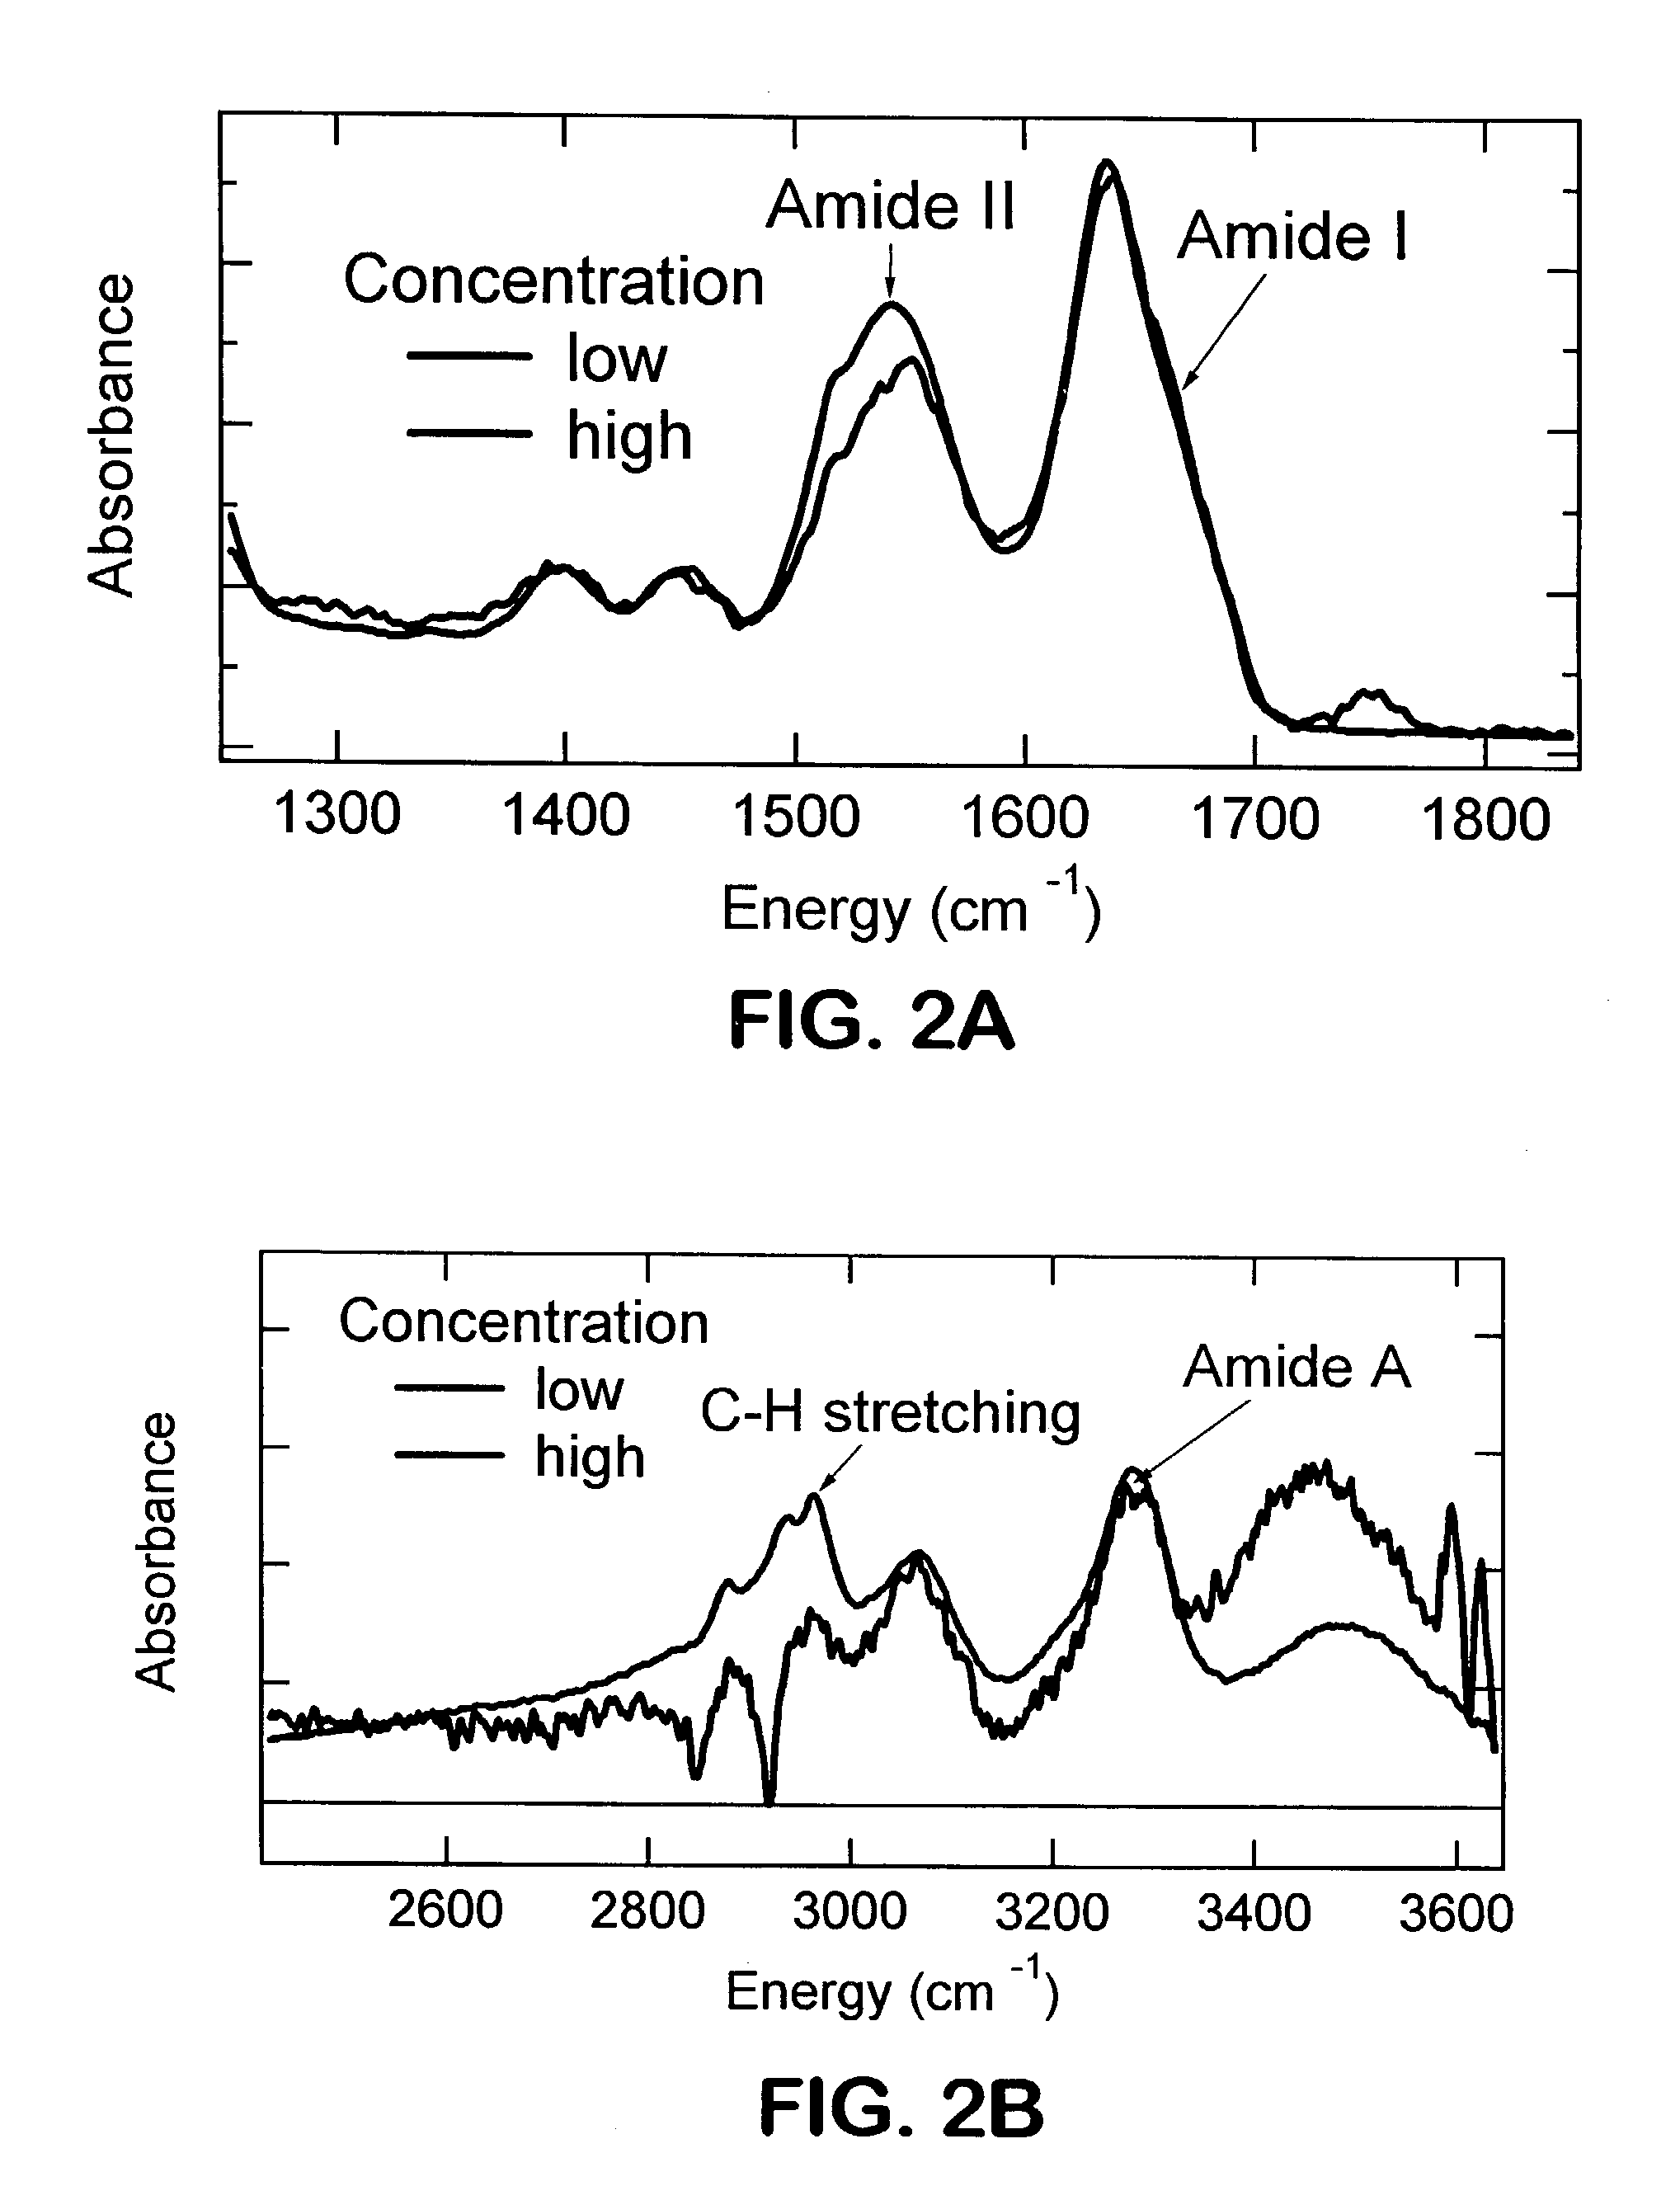 Single pass attenuated total reflection fourier transform infrared microscopy apparatus and method for identifying protein secondary structure, surface charge and binding affinity